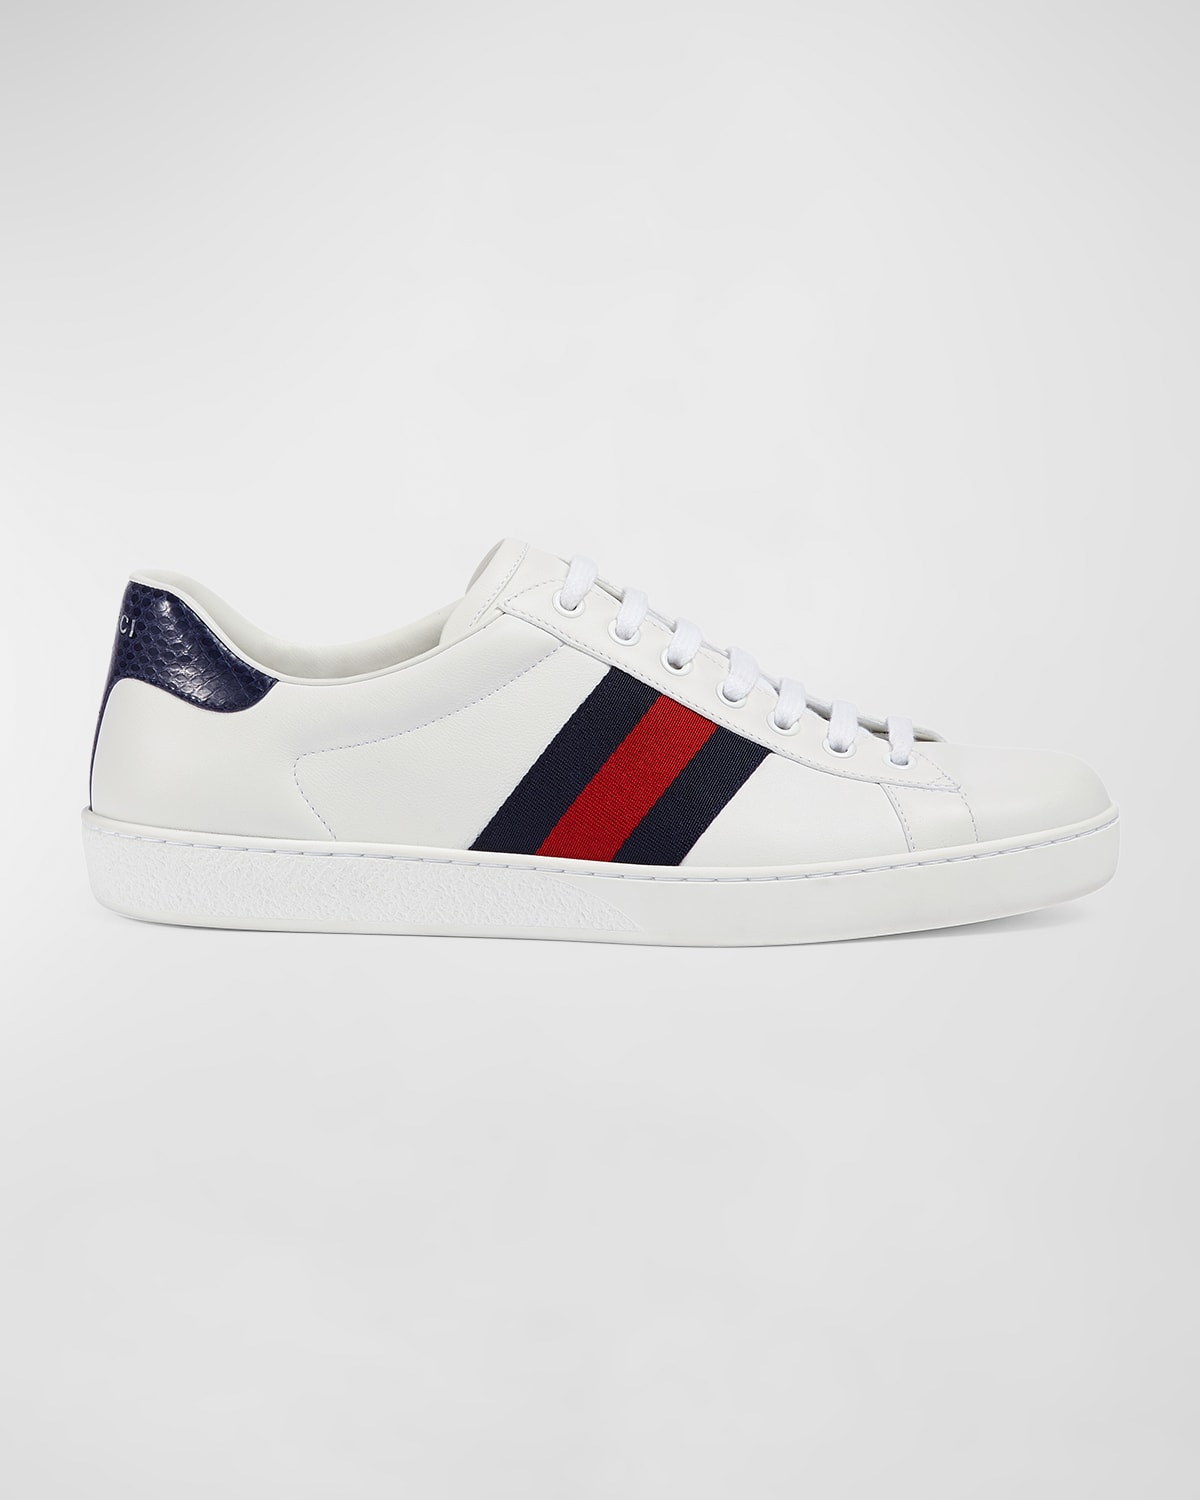 GUCCI MEN'S NEW ACE LEATHER LOW-TOP SNEAKERS